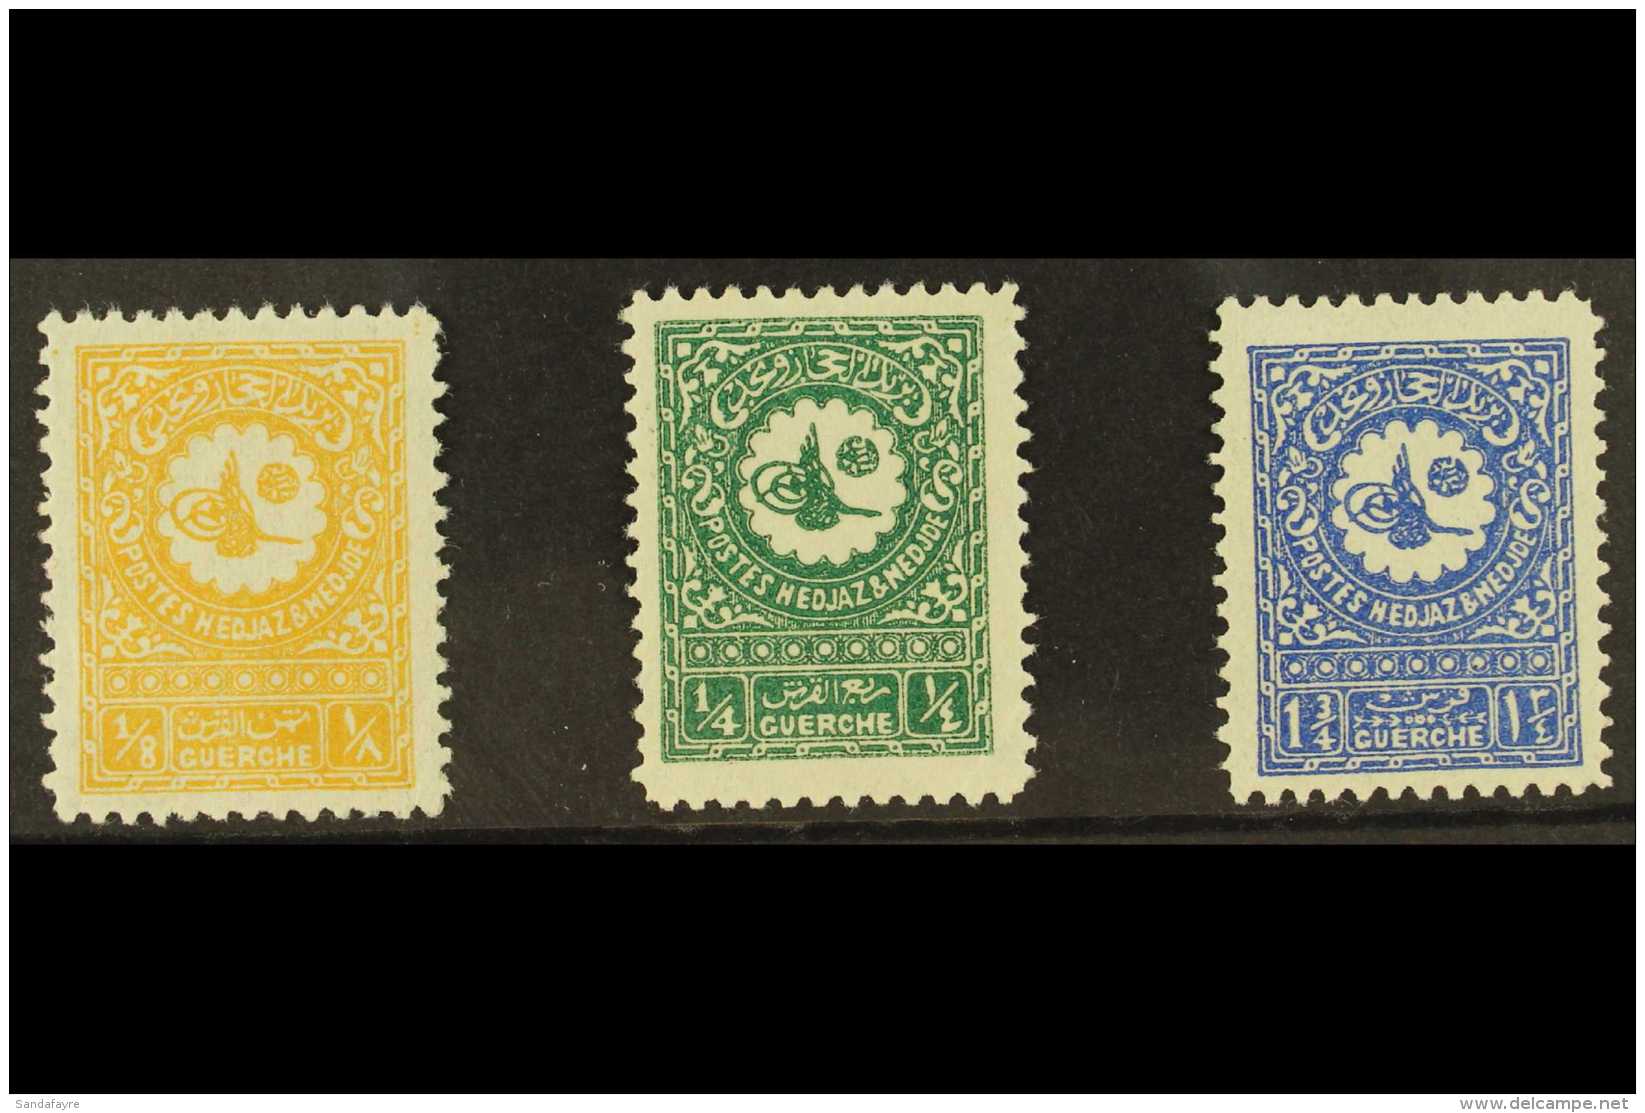 1931-32 Complete Set, SG 310/312, Very Fine Mint. (3 Stamps) For More Images, Please Visit... - Arabia Saudita